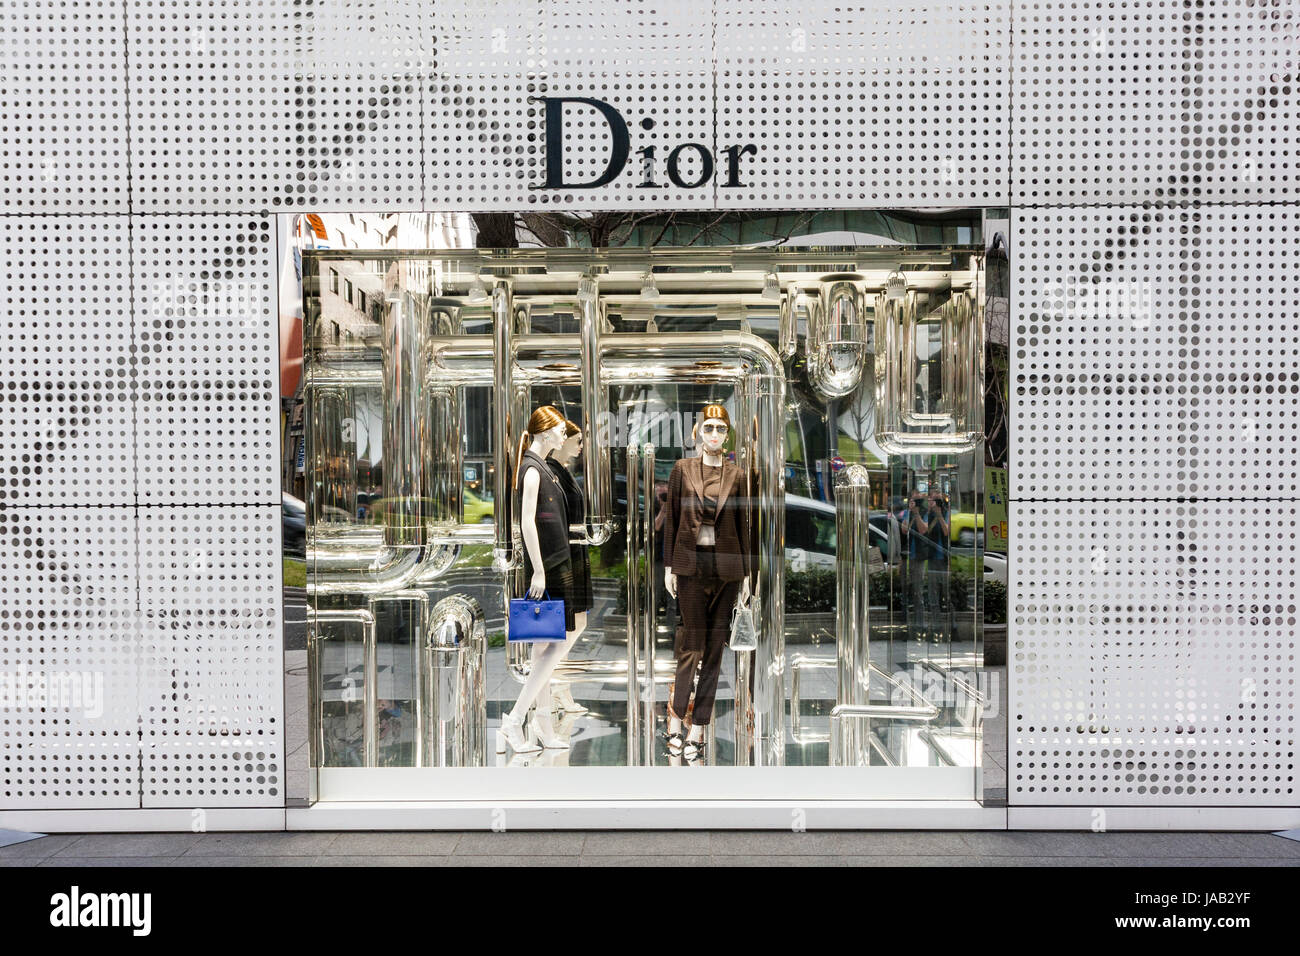 Japan, Osaka, Shinsaibashi. Dior fashion store shop window with dress display surrounded by grey grill patterned wall, with name above window. Stock Photo